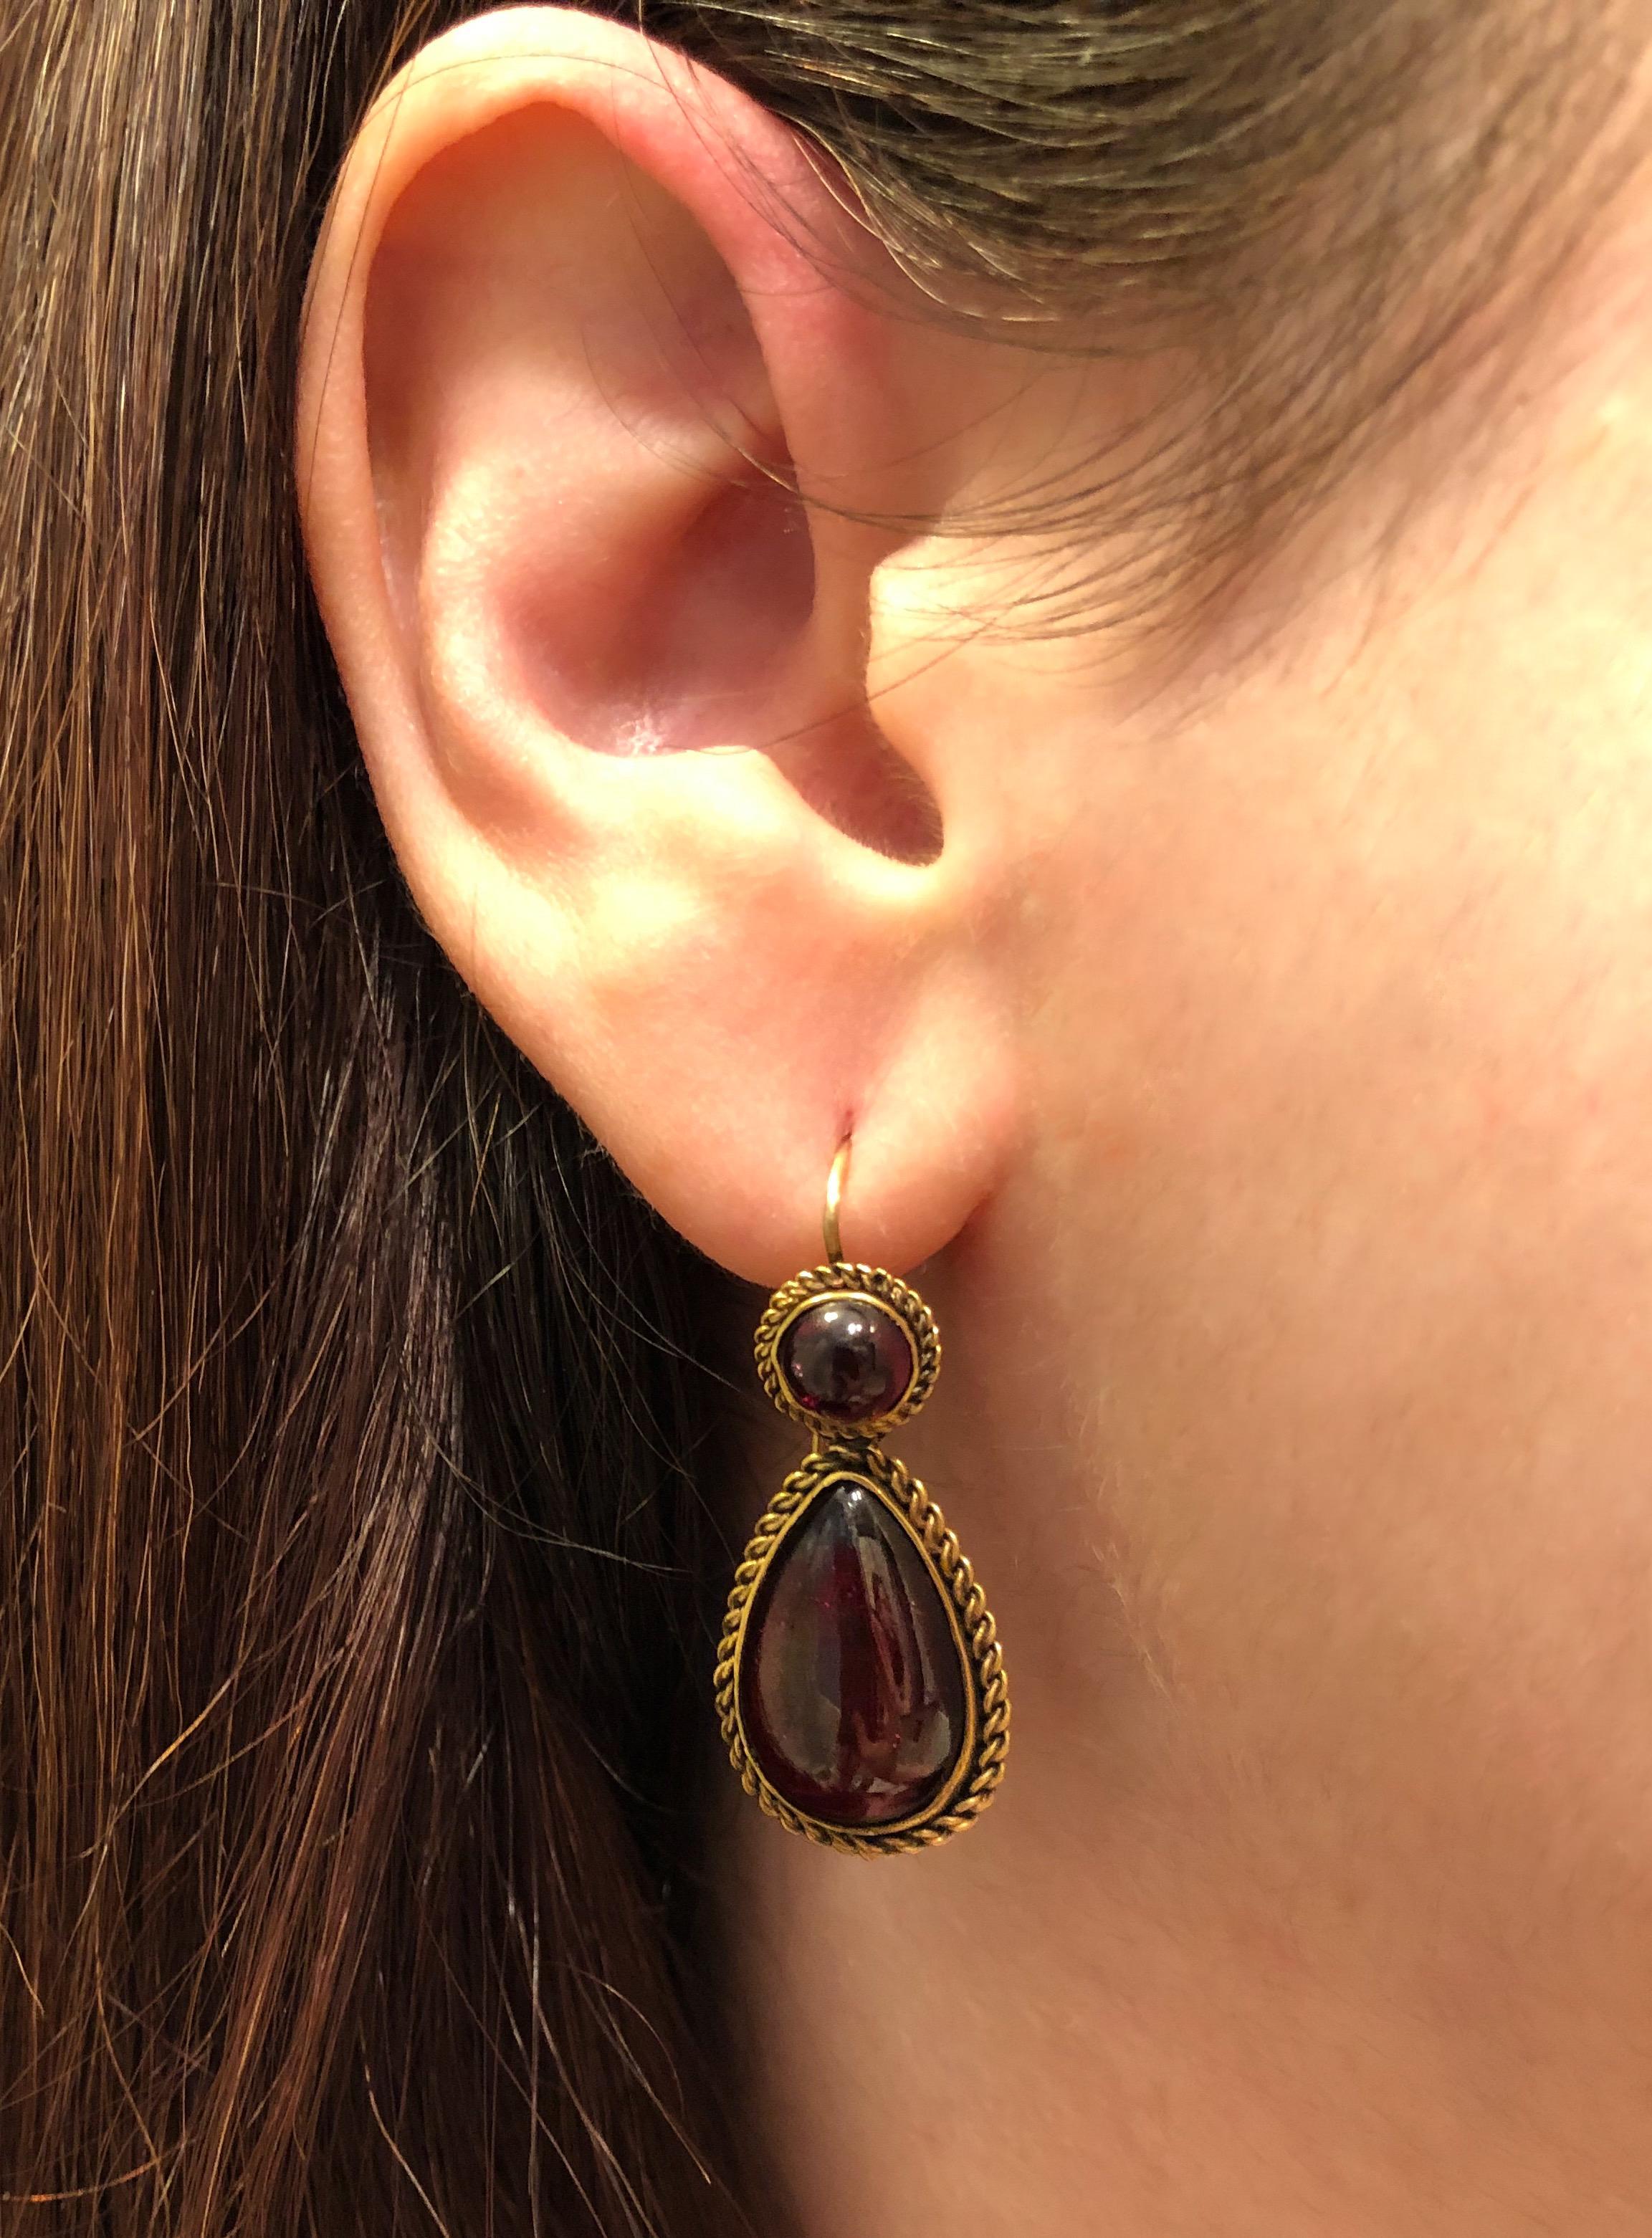 Cabochon garnets are set in 15 karat yellow gold closed back earrings with rope trimmed edges. Length 1-3/8 inches, width 9/16 inch.
